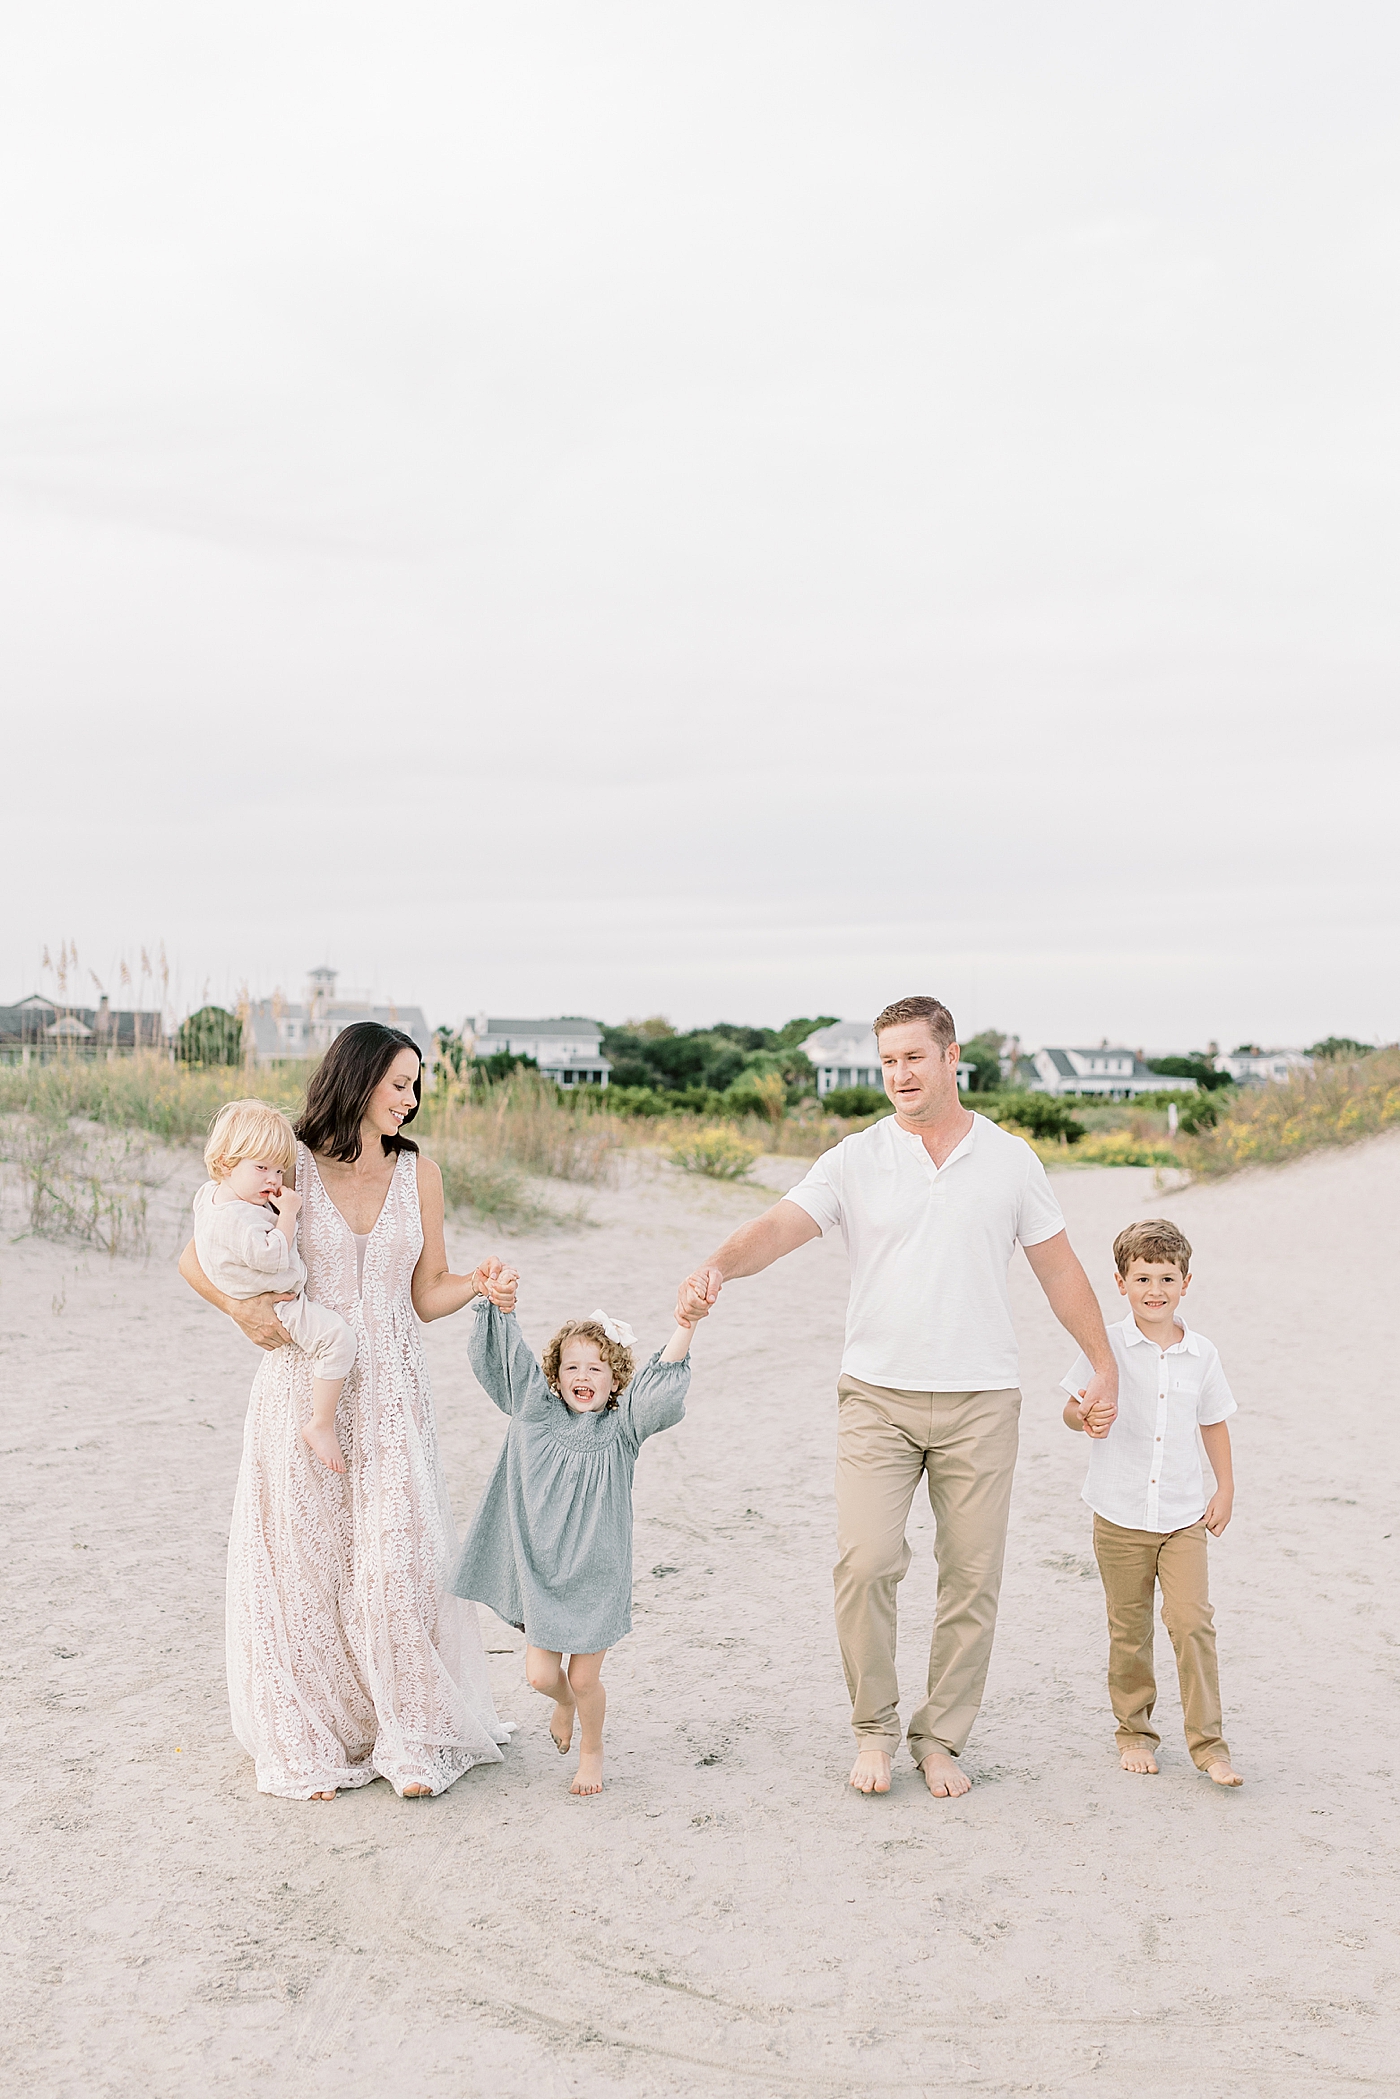 Family holding hands walking on the beach | Photo by Caitlyn Motycka Photography